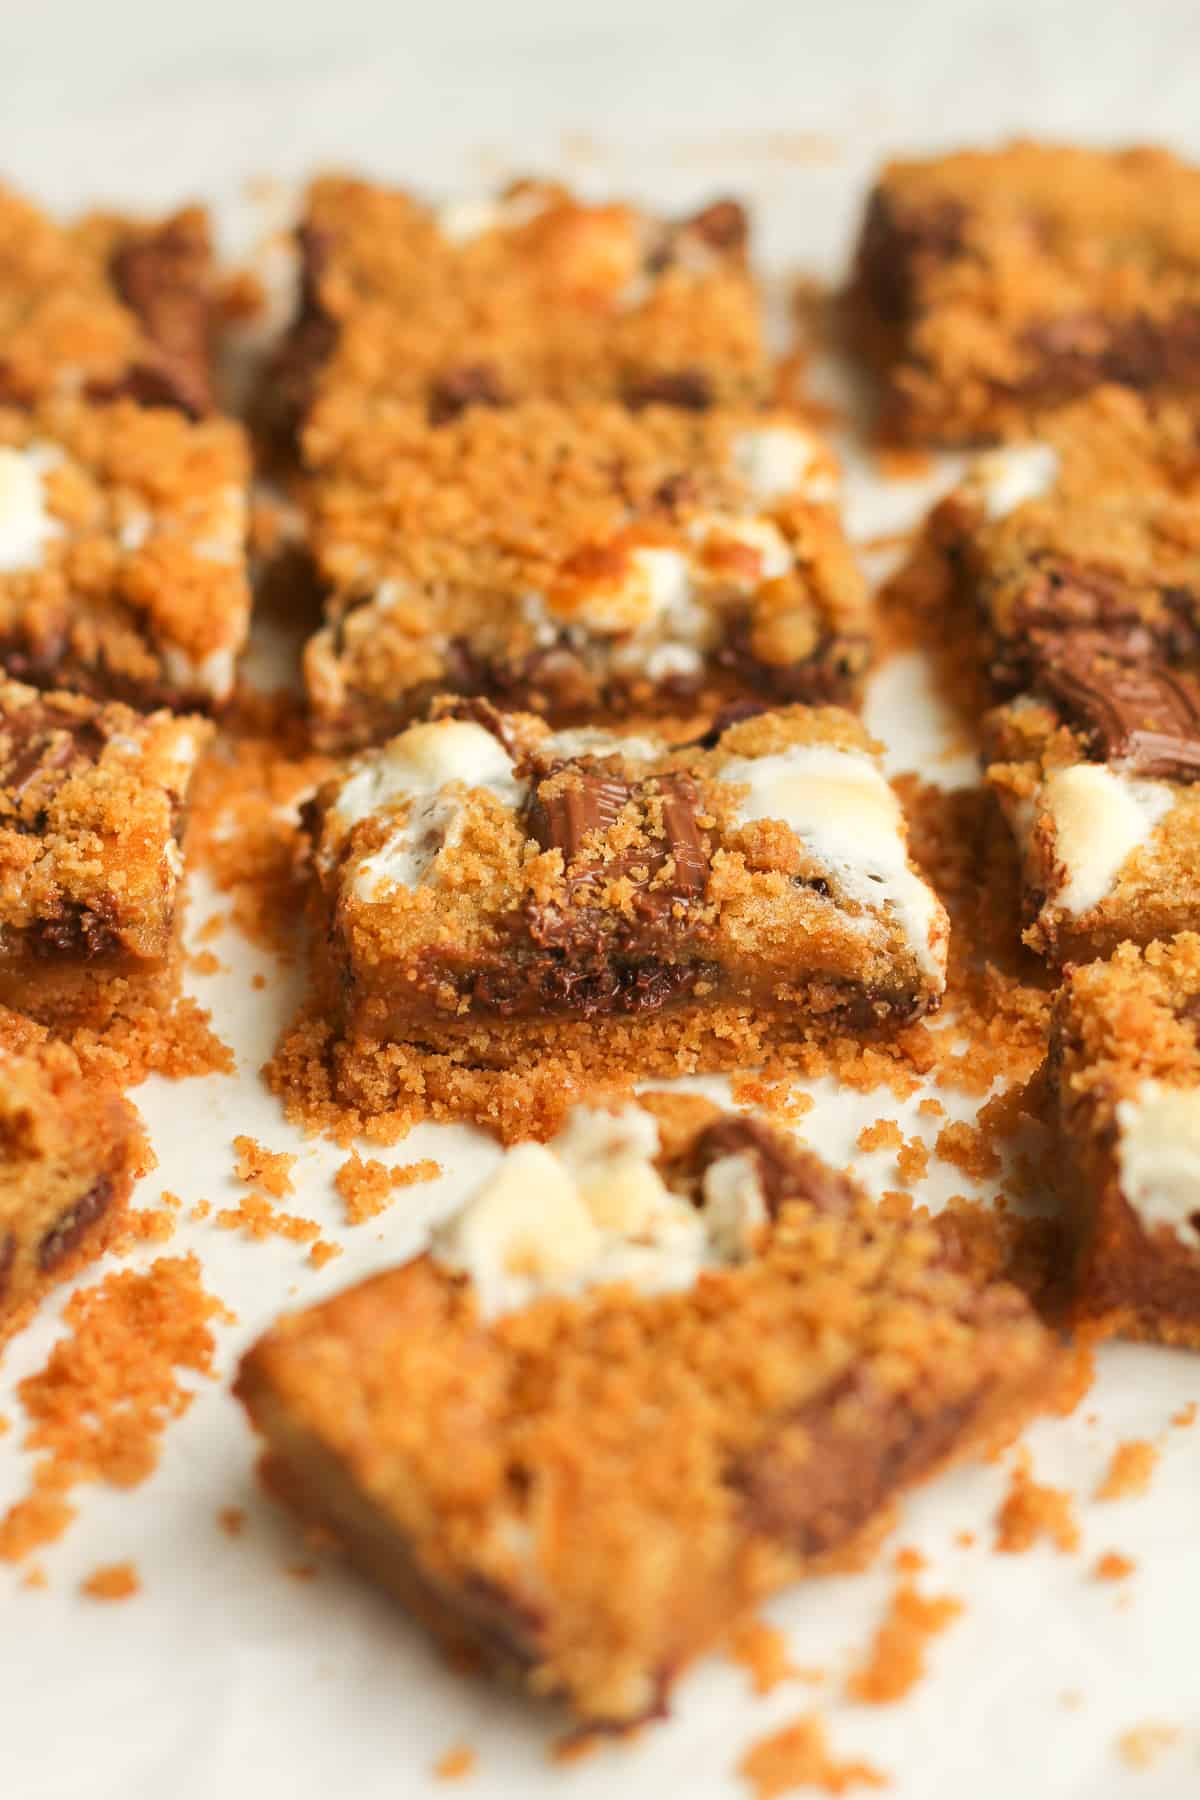 Side shot of some s'mores bars.